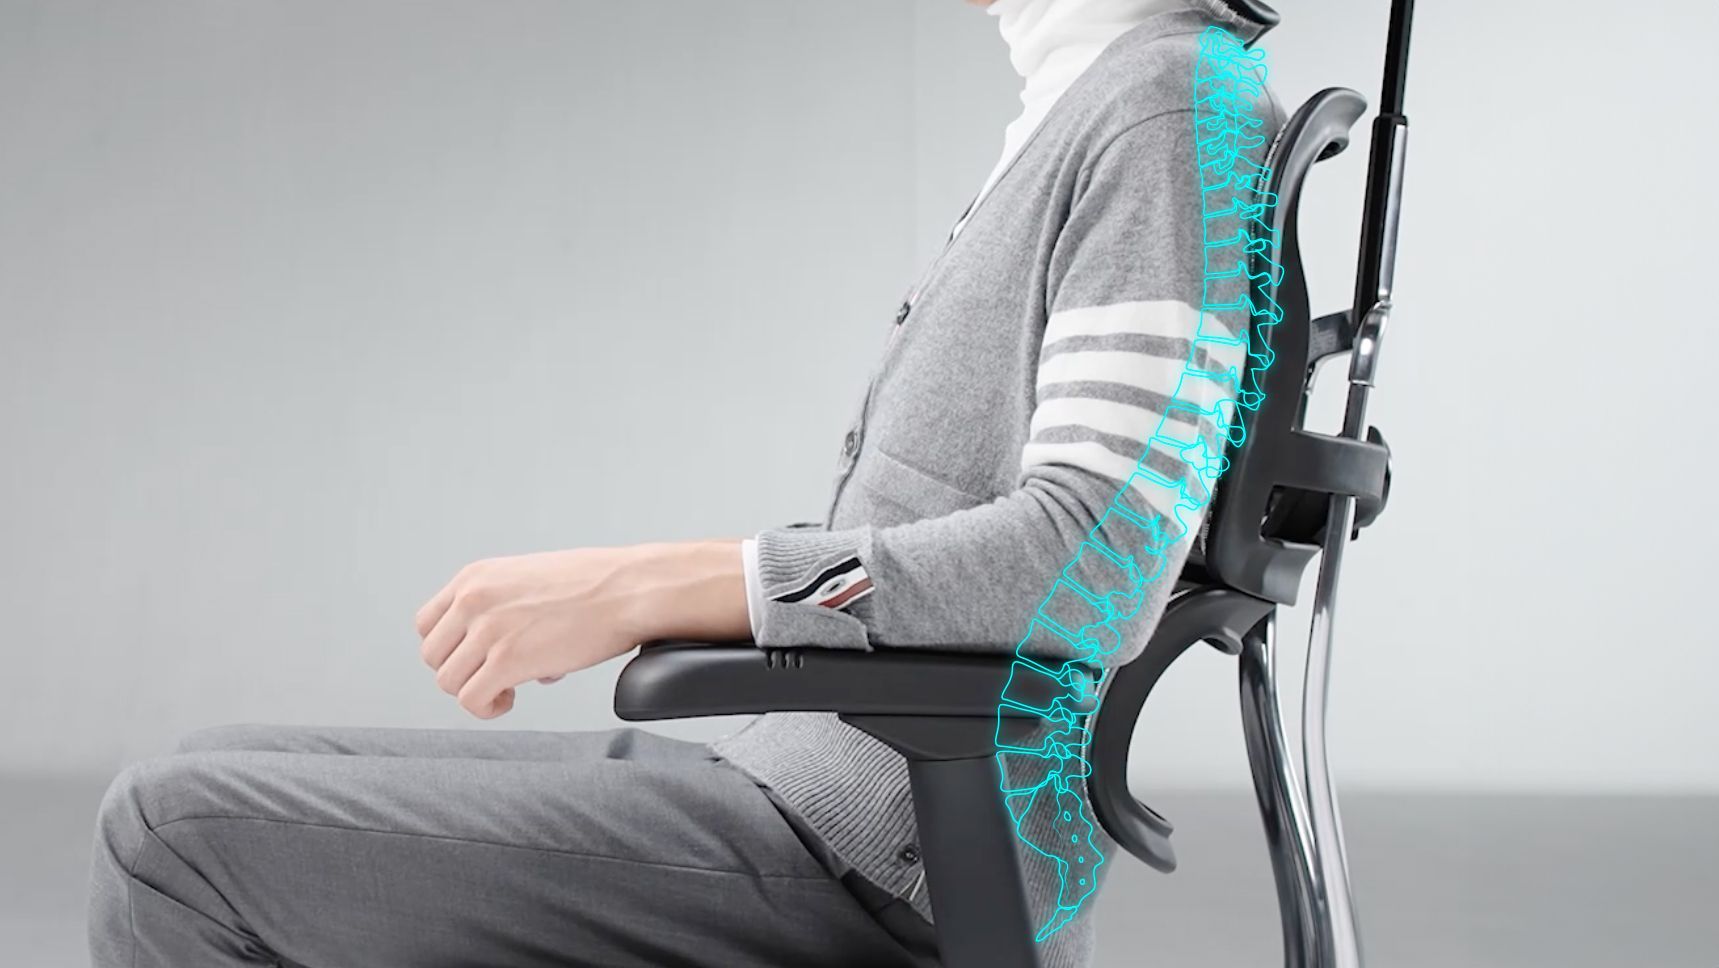 The side profile of an Ergohuman office chair. A man wearing a grey shirt and trousers is sitting in the chair. He is upright and leaning back slightly. A blue illustration of a spine overlays the image to showcase how the chair supports the natural curvature of the spine.